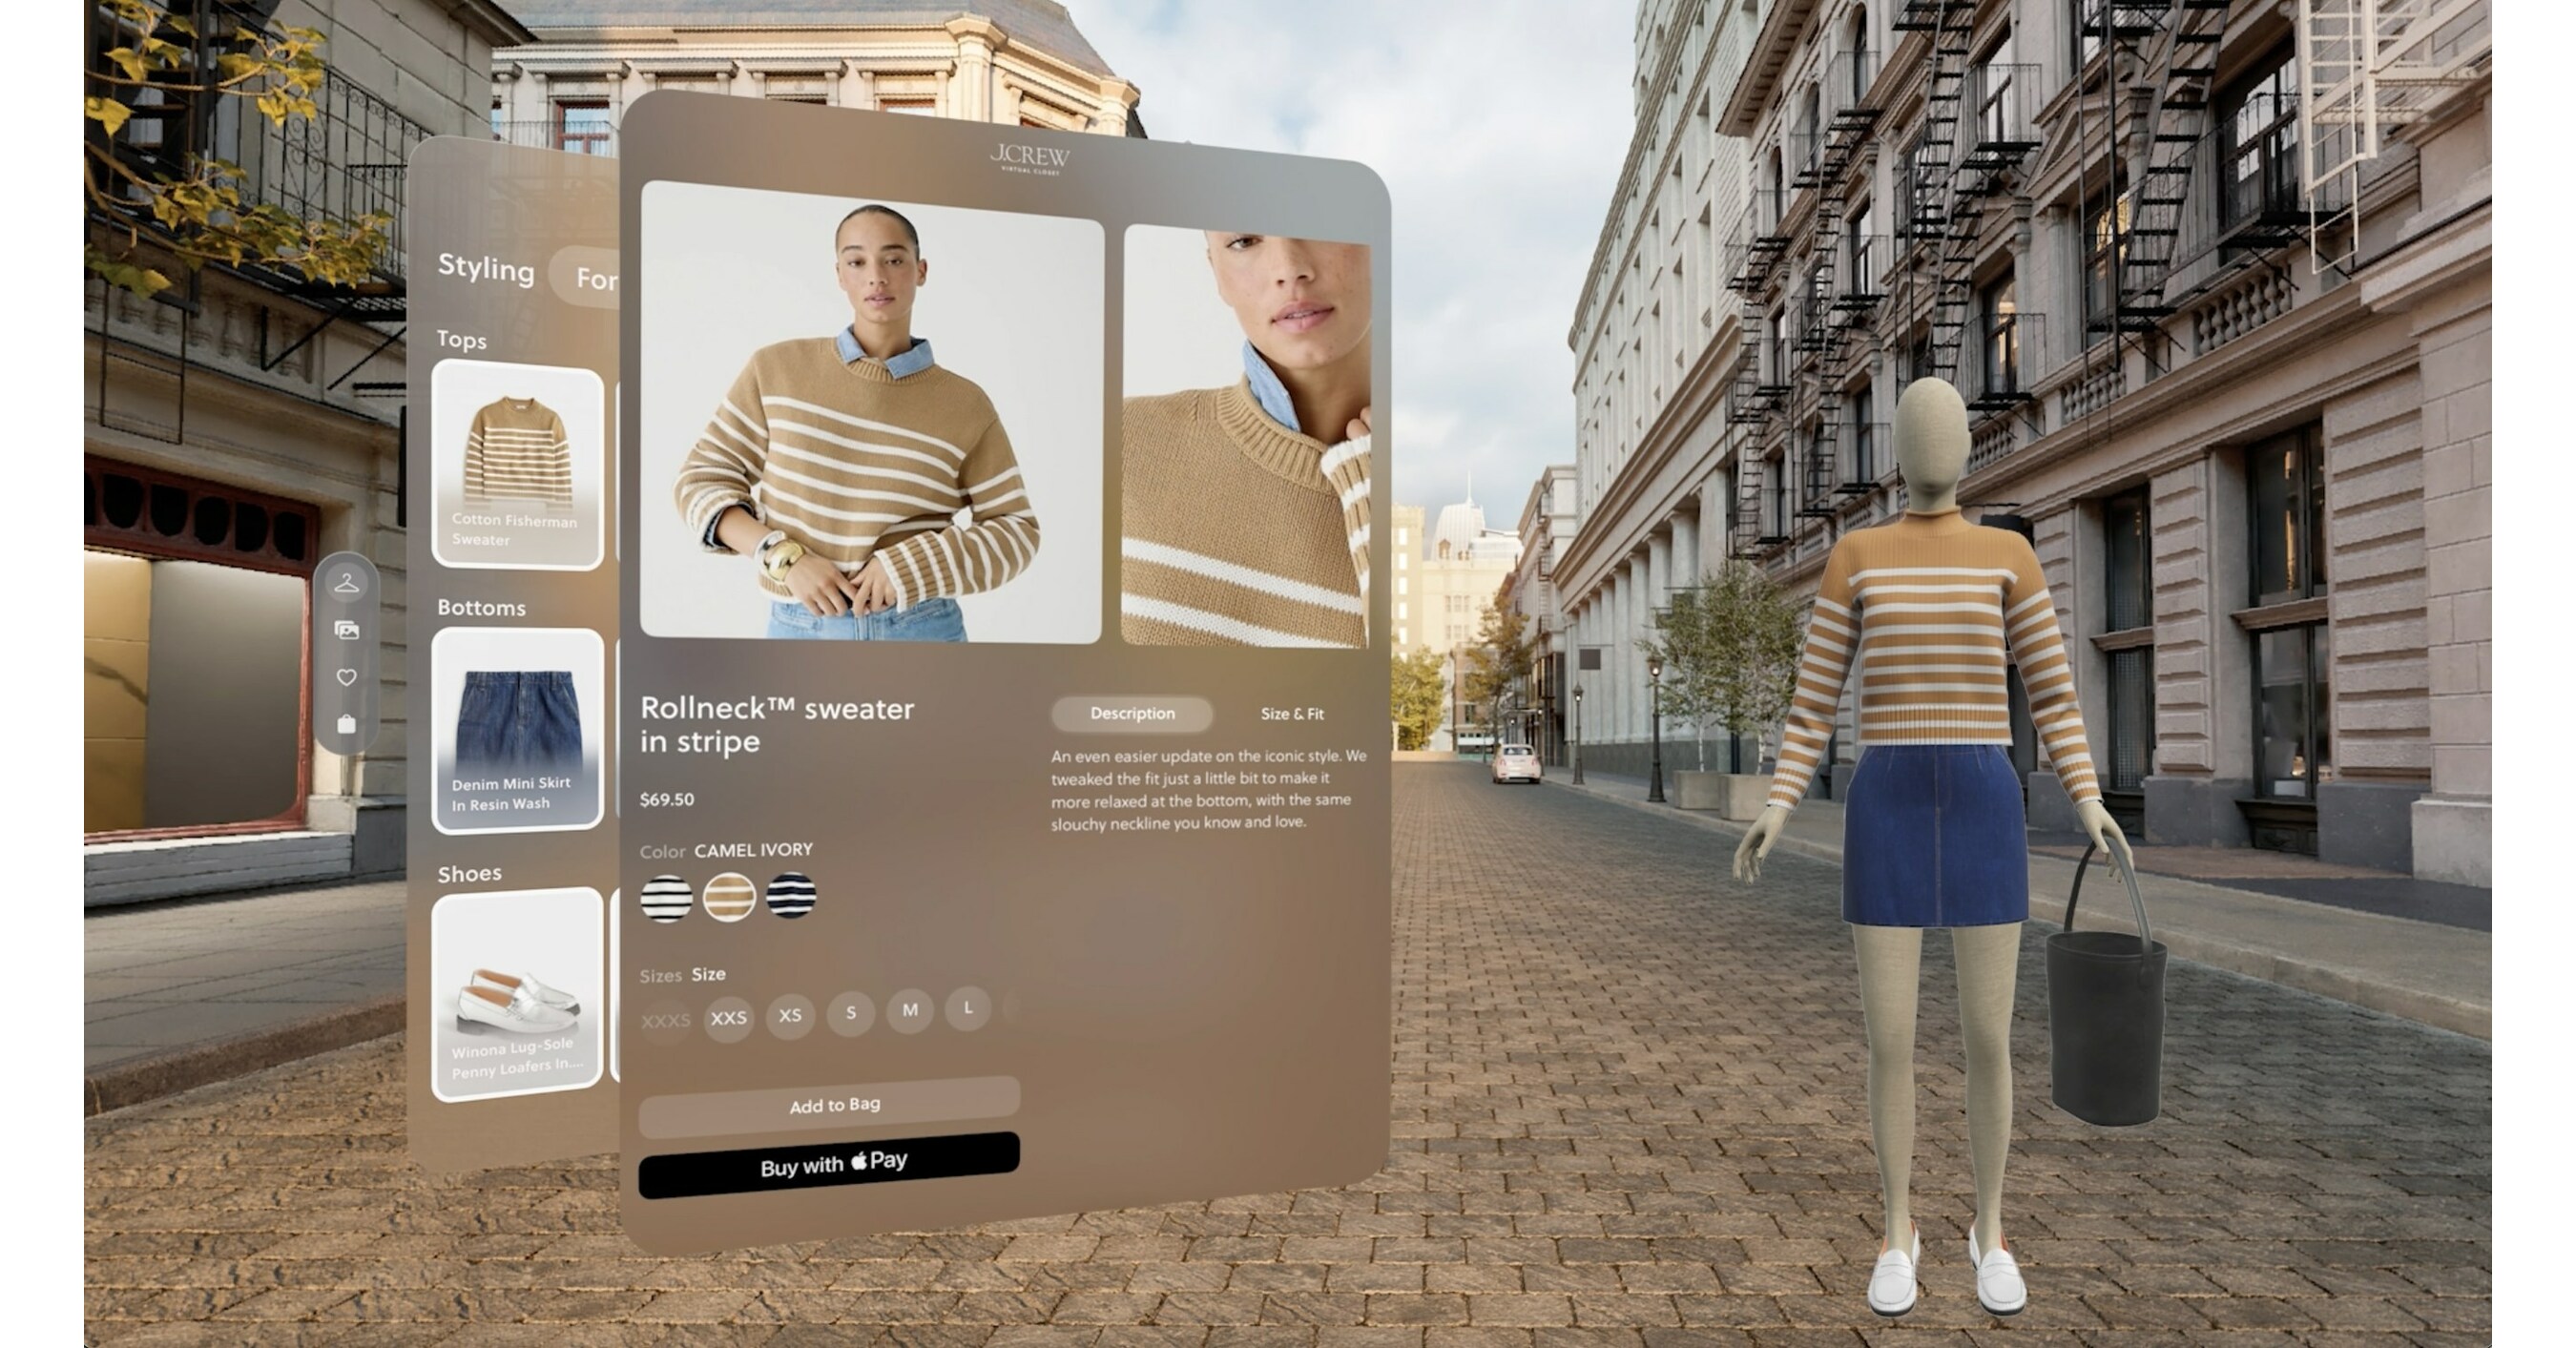 J.Crew's new app gives shoppers a 48-hour headstart on launches - Glossy